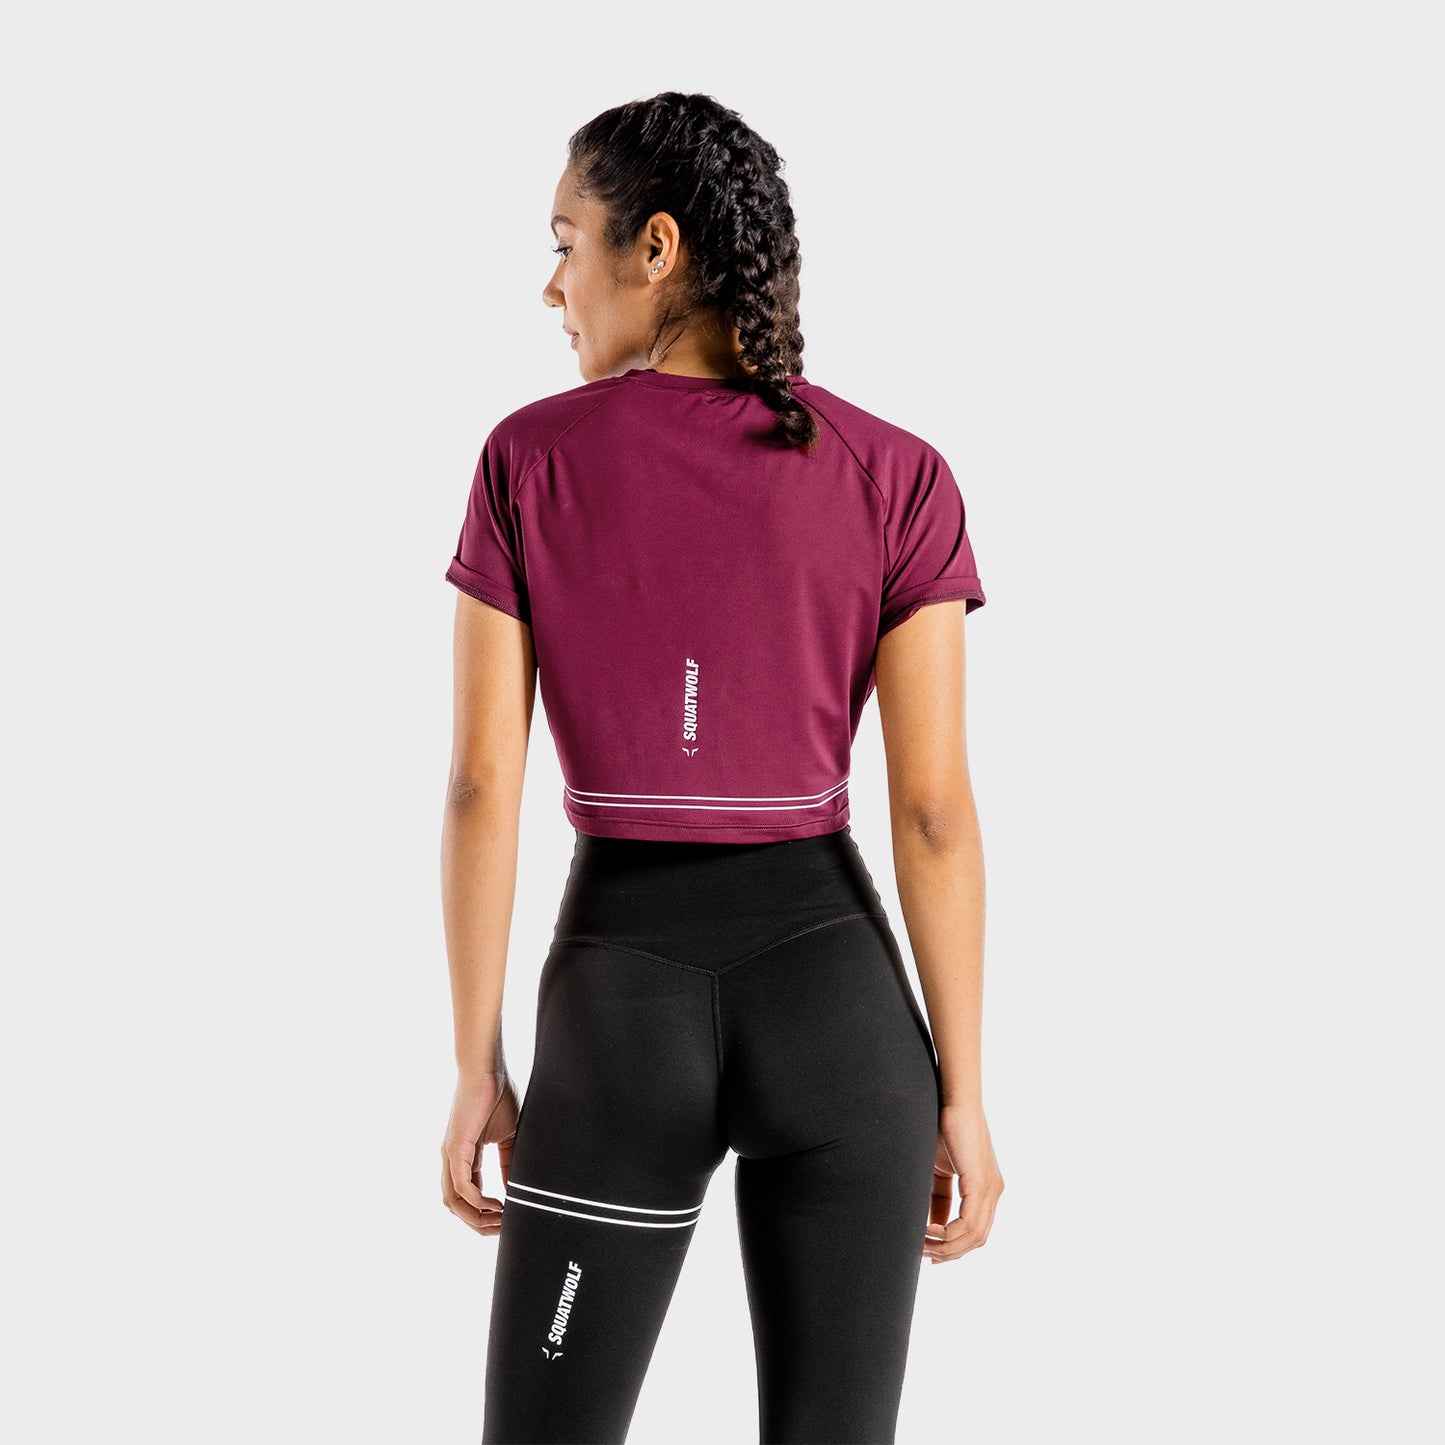 squatwolf-gym-t-shirts-for-women-flux-crop-tee-maroon-workout-clothes